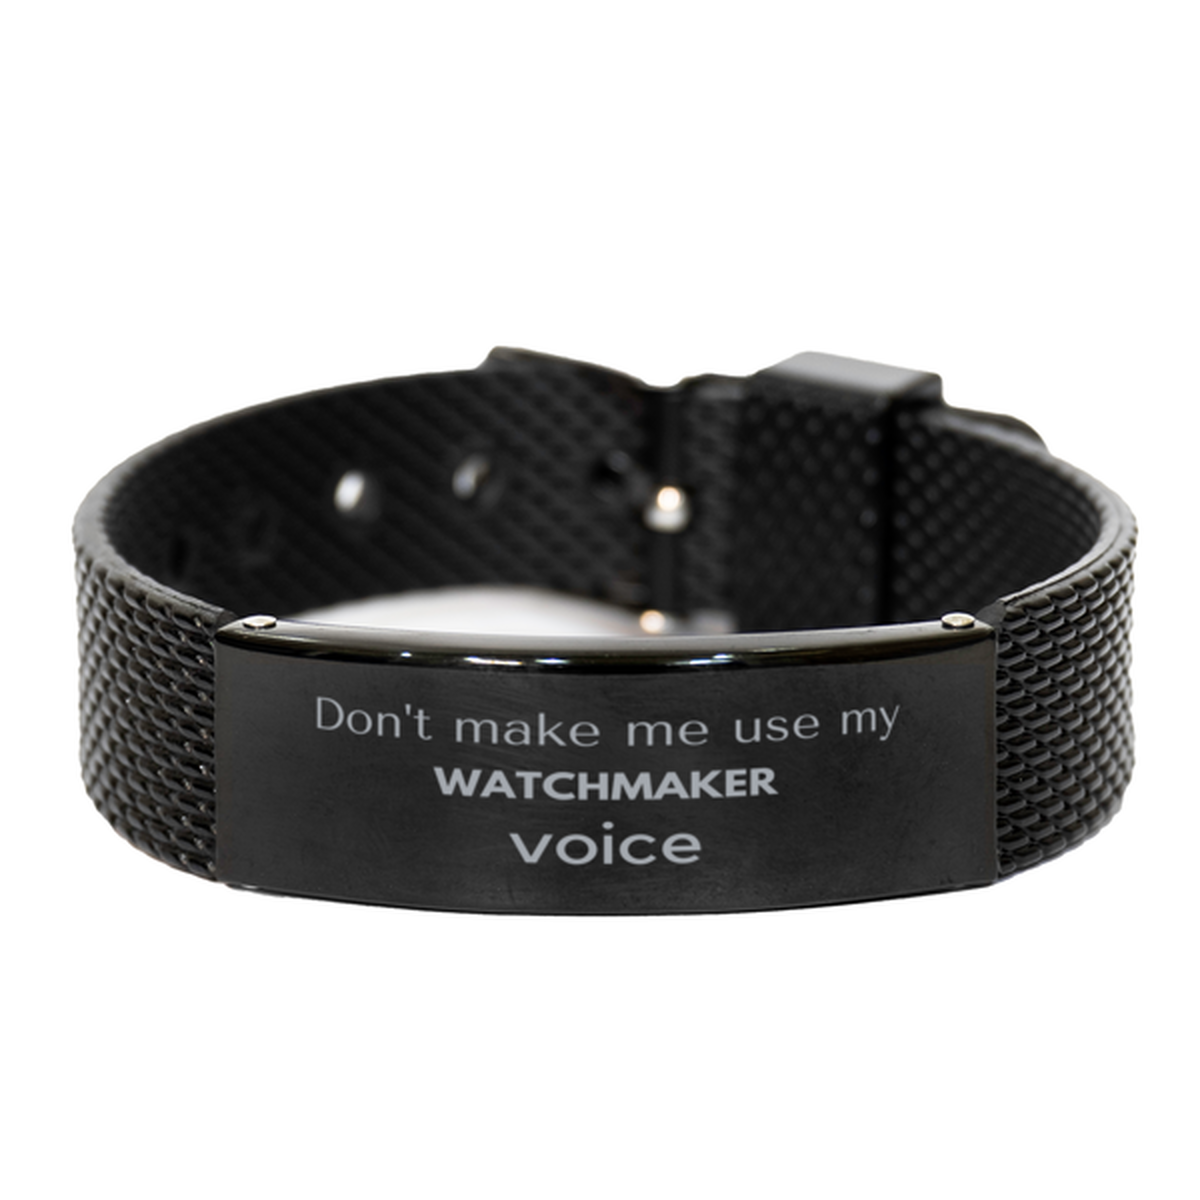 Don't make me use my Watchmaker voice, Sarcasm Watchmaker Gifts, Christmas Watchmaker Black Shark Mesh Bracelet Birthday Unique Gifts For Watchmaker Coworkers, Men, Women, Colleague, Friends